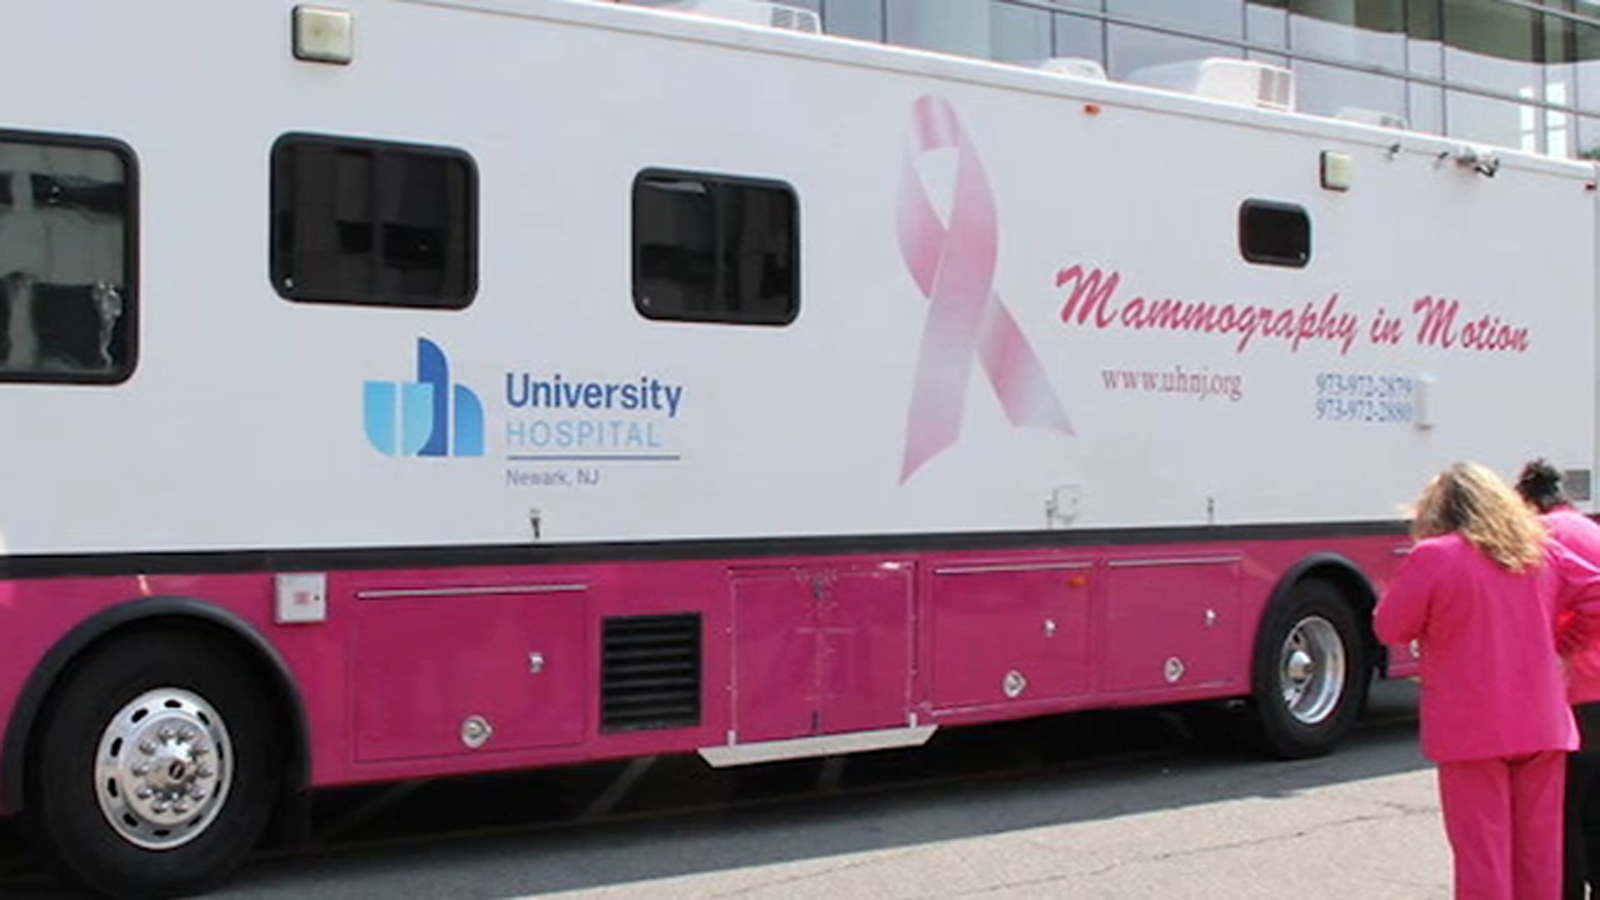 University Hospital reveals return of mobile bus providing full mammography and radiology services for women [Video]